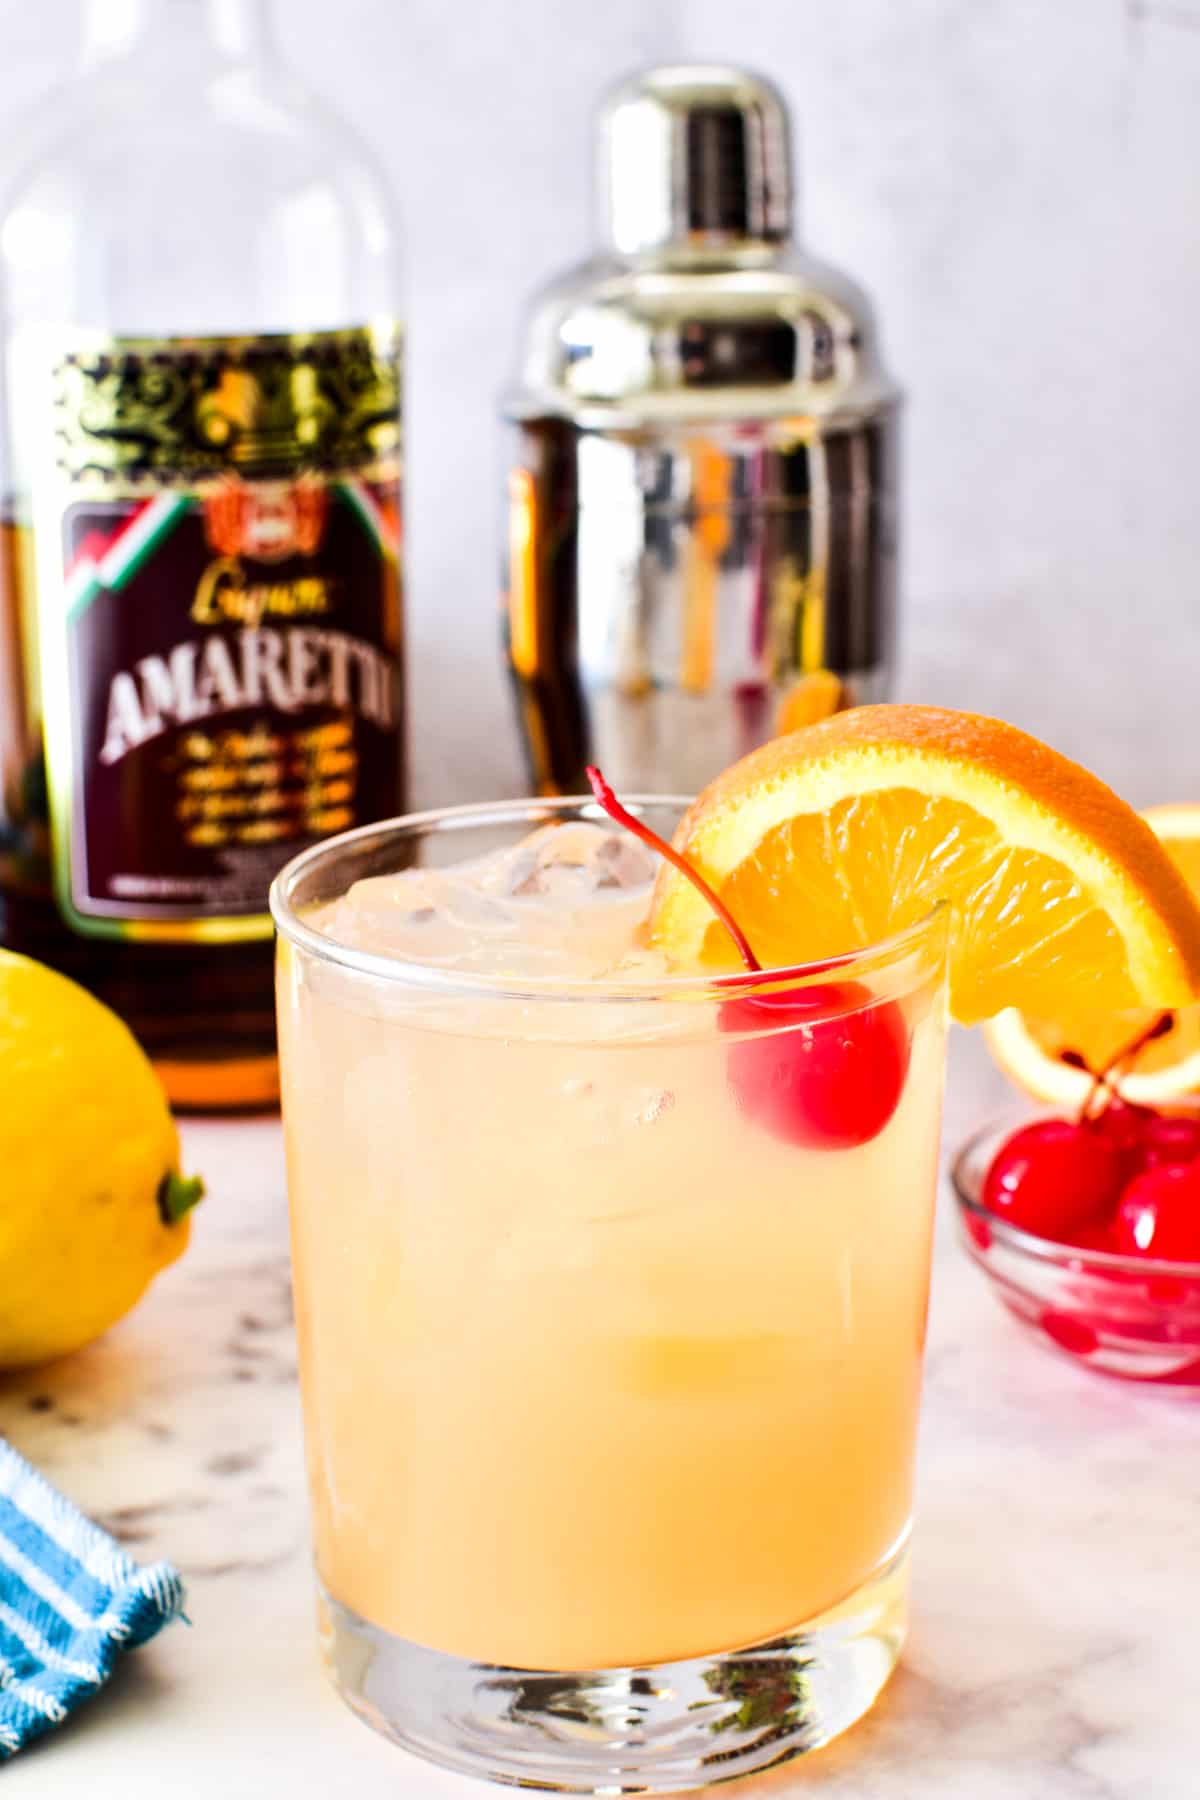 Amaretto Sour in a glass with an orange slice and maraschino cherry